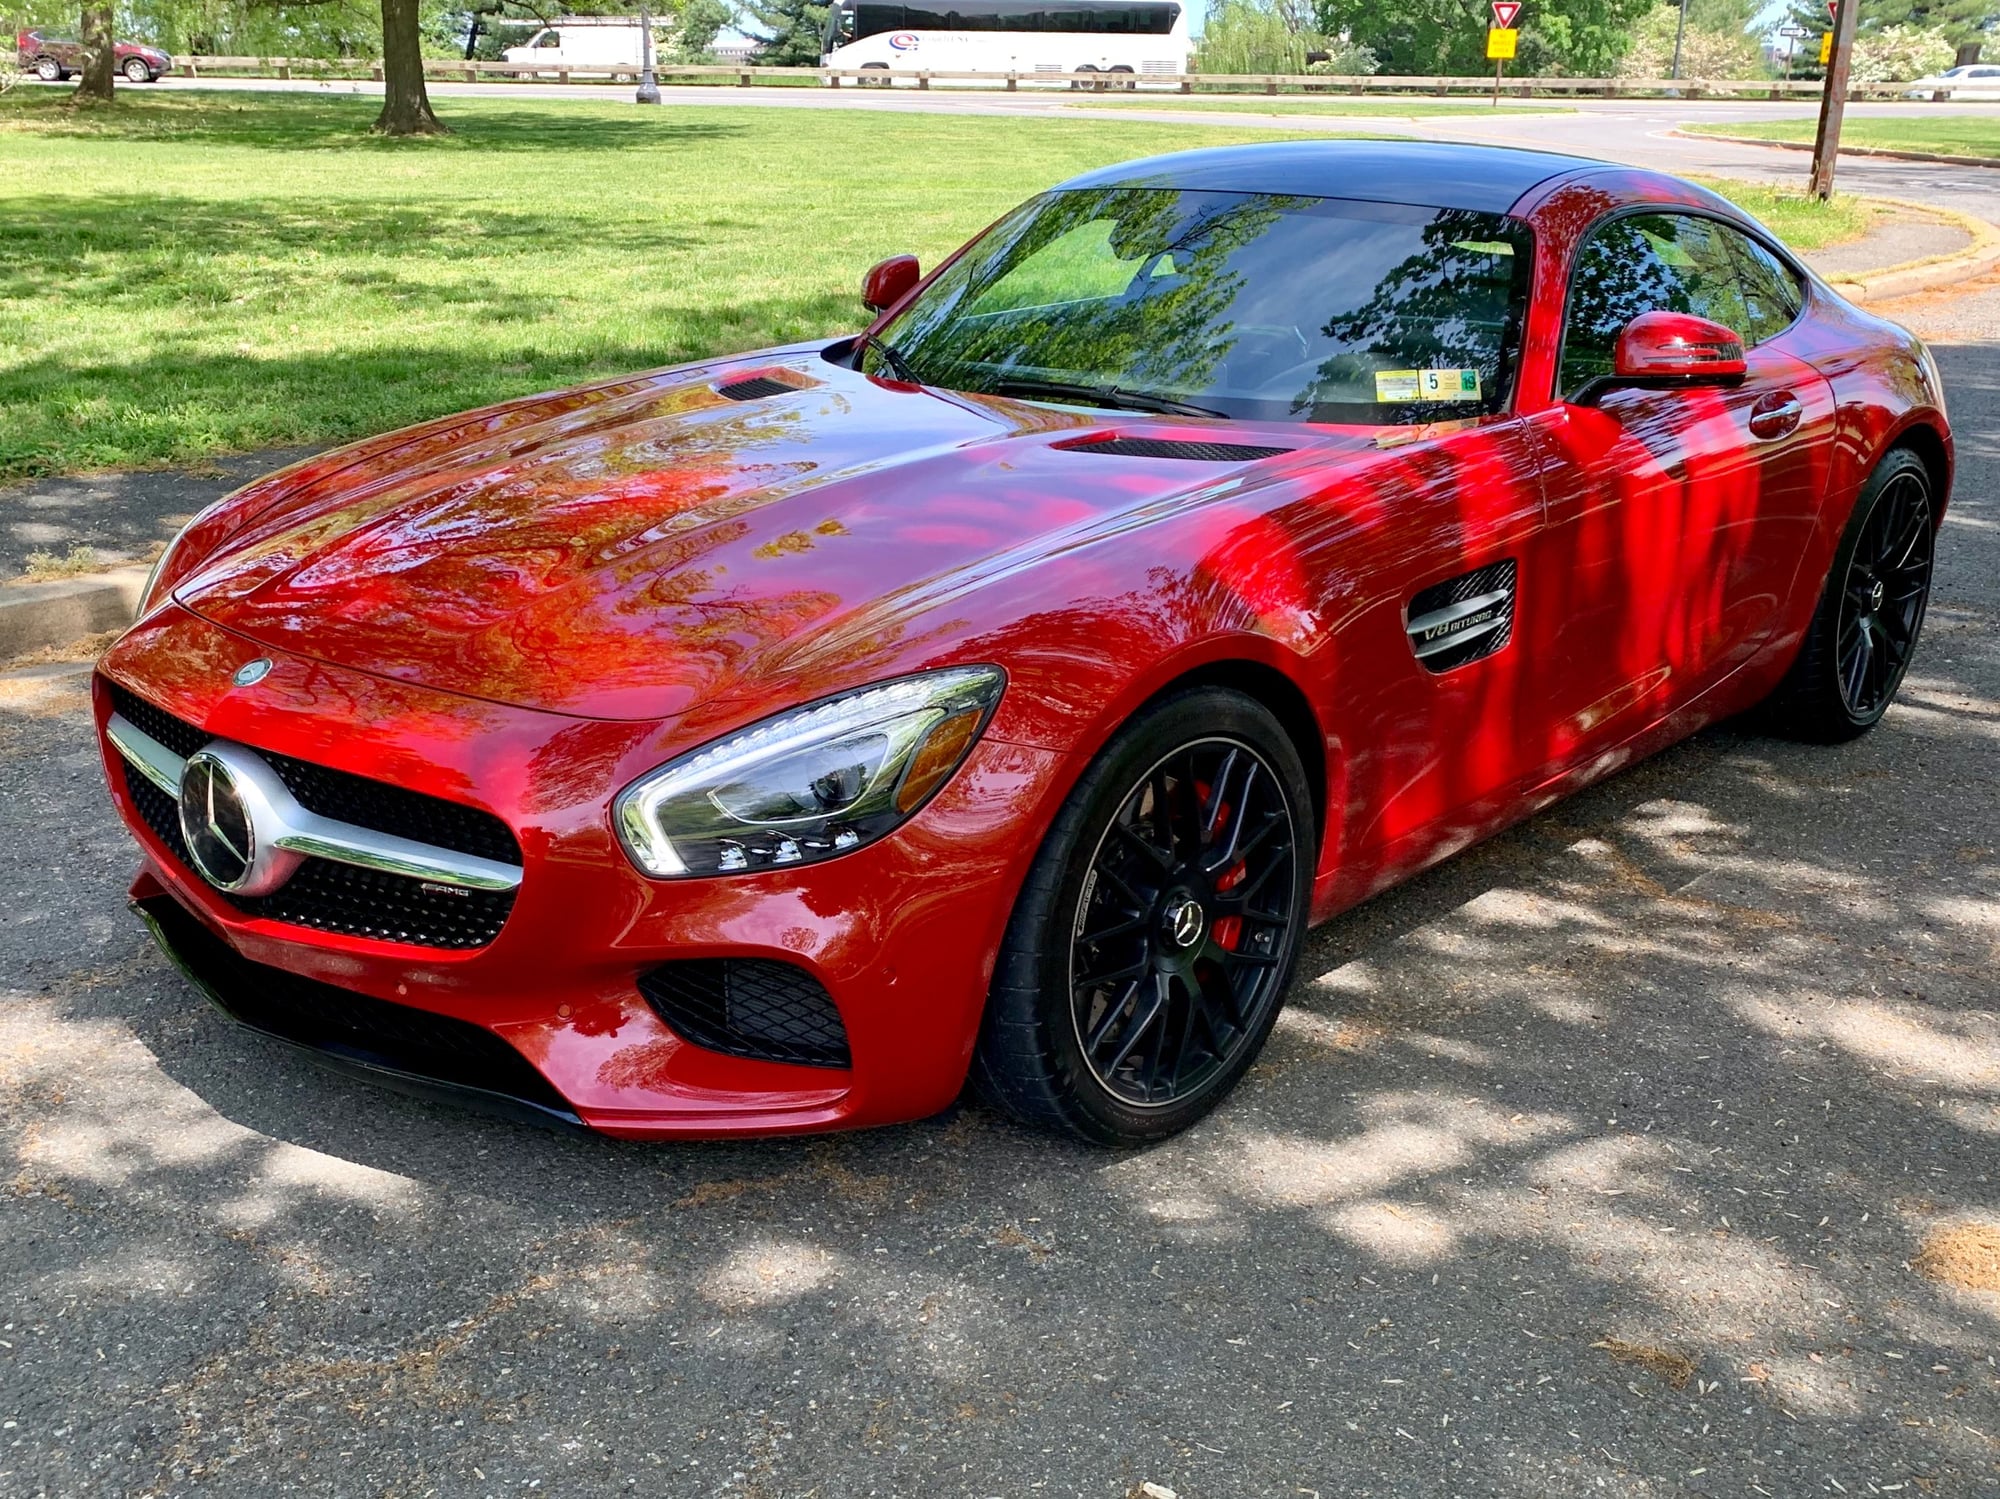 2016 Mercedes-Benz AMG GT S - 2016 Mercedes-Benz AMG GTS with Dynamic Plus - Used - VIN WDDYJ7JA6GA006976 - 13,700 Miles - 8 cyl - 2WD - Automatic - Coupe - Red - Alexandria, VA 22314, United States